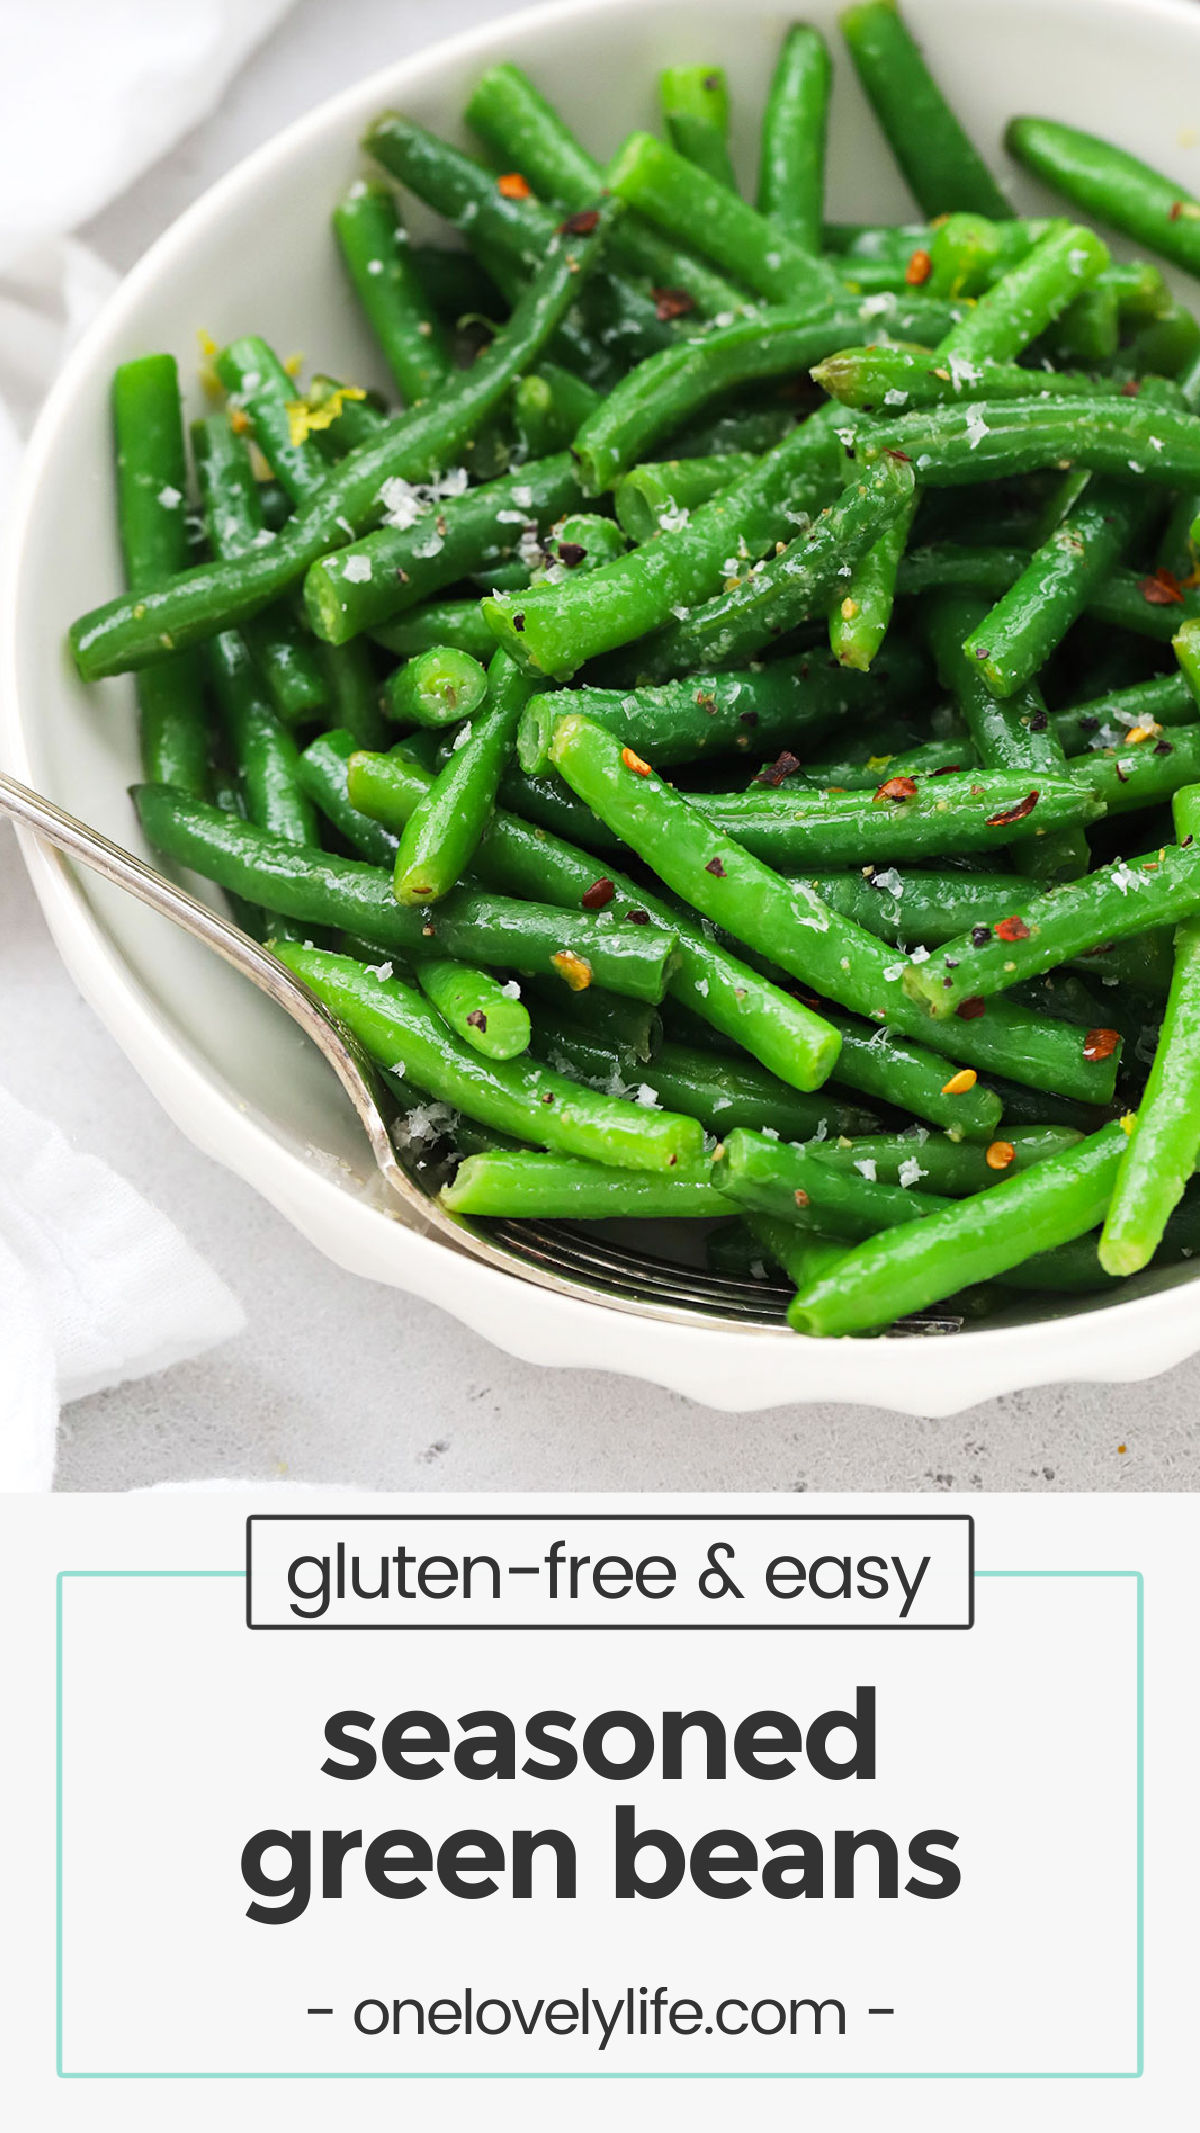 This easy seasoned green beans recipe is made from simple ingredients that pack in BIG flavor. You'll love this easy green bean seasoning! // seasoning for green beans / seasoning for frozen green beans / seasoning for canned green beans / how to season green beans / green beans side dish / seasoned green beans without bacon / green bean recipe / vegetable side dish / gluten-free side dishes / gluten-free thanksgiving recipes / gluten-free Easter recipes